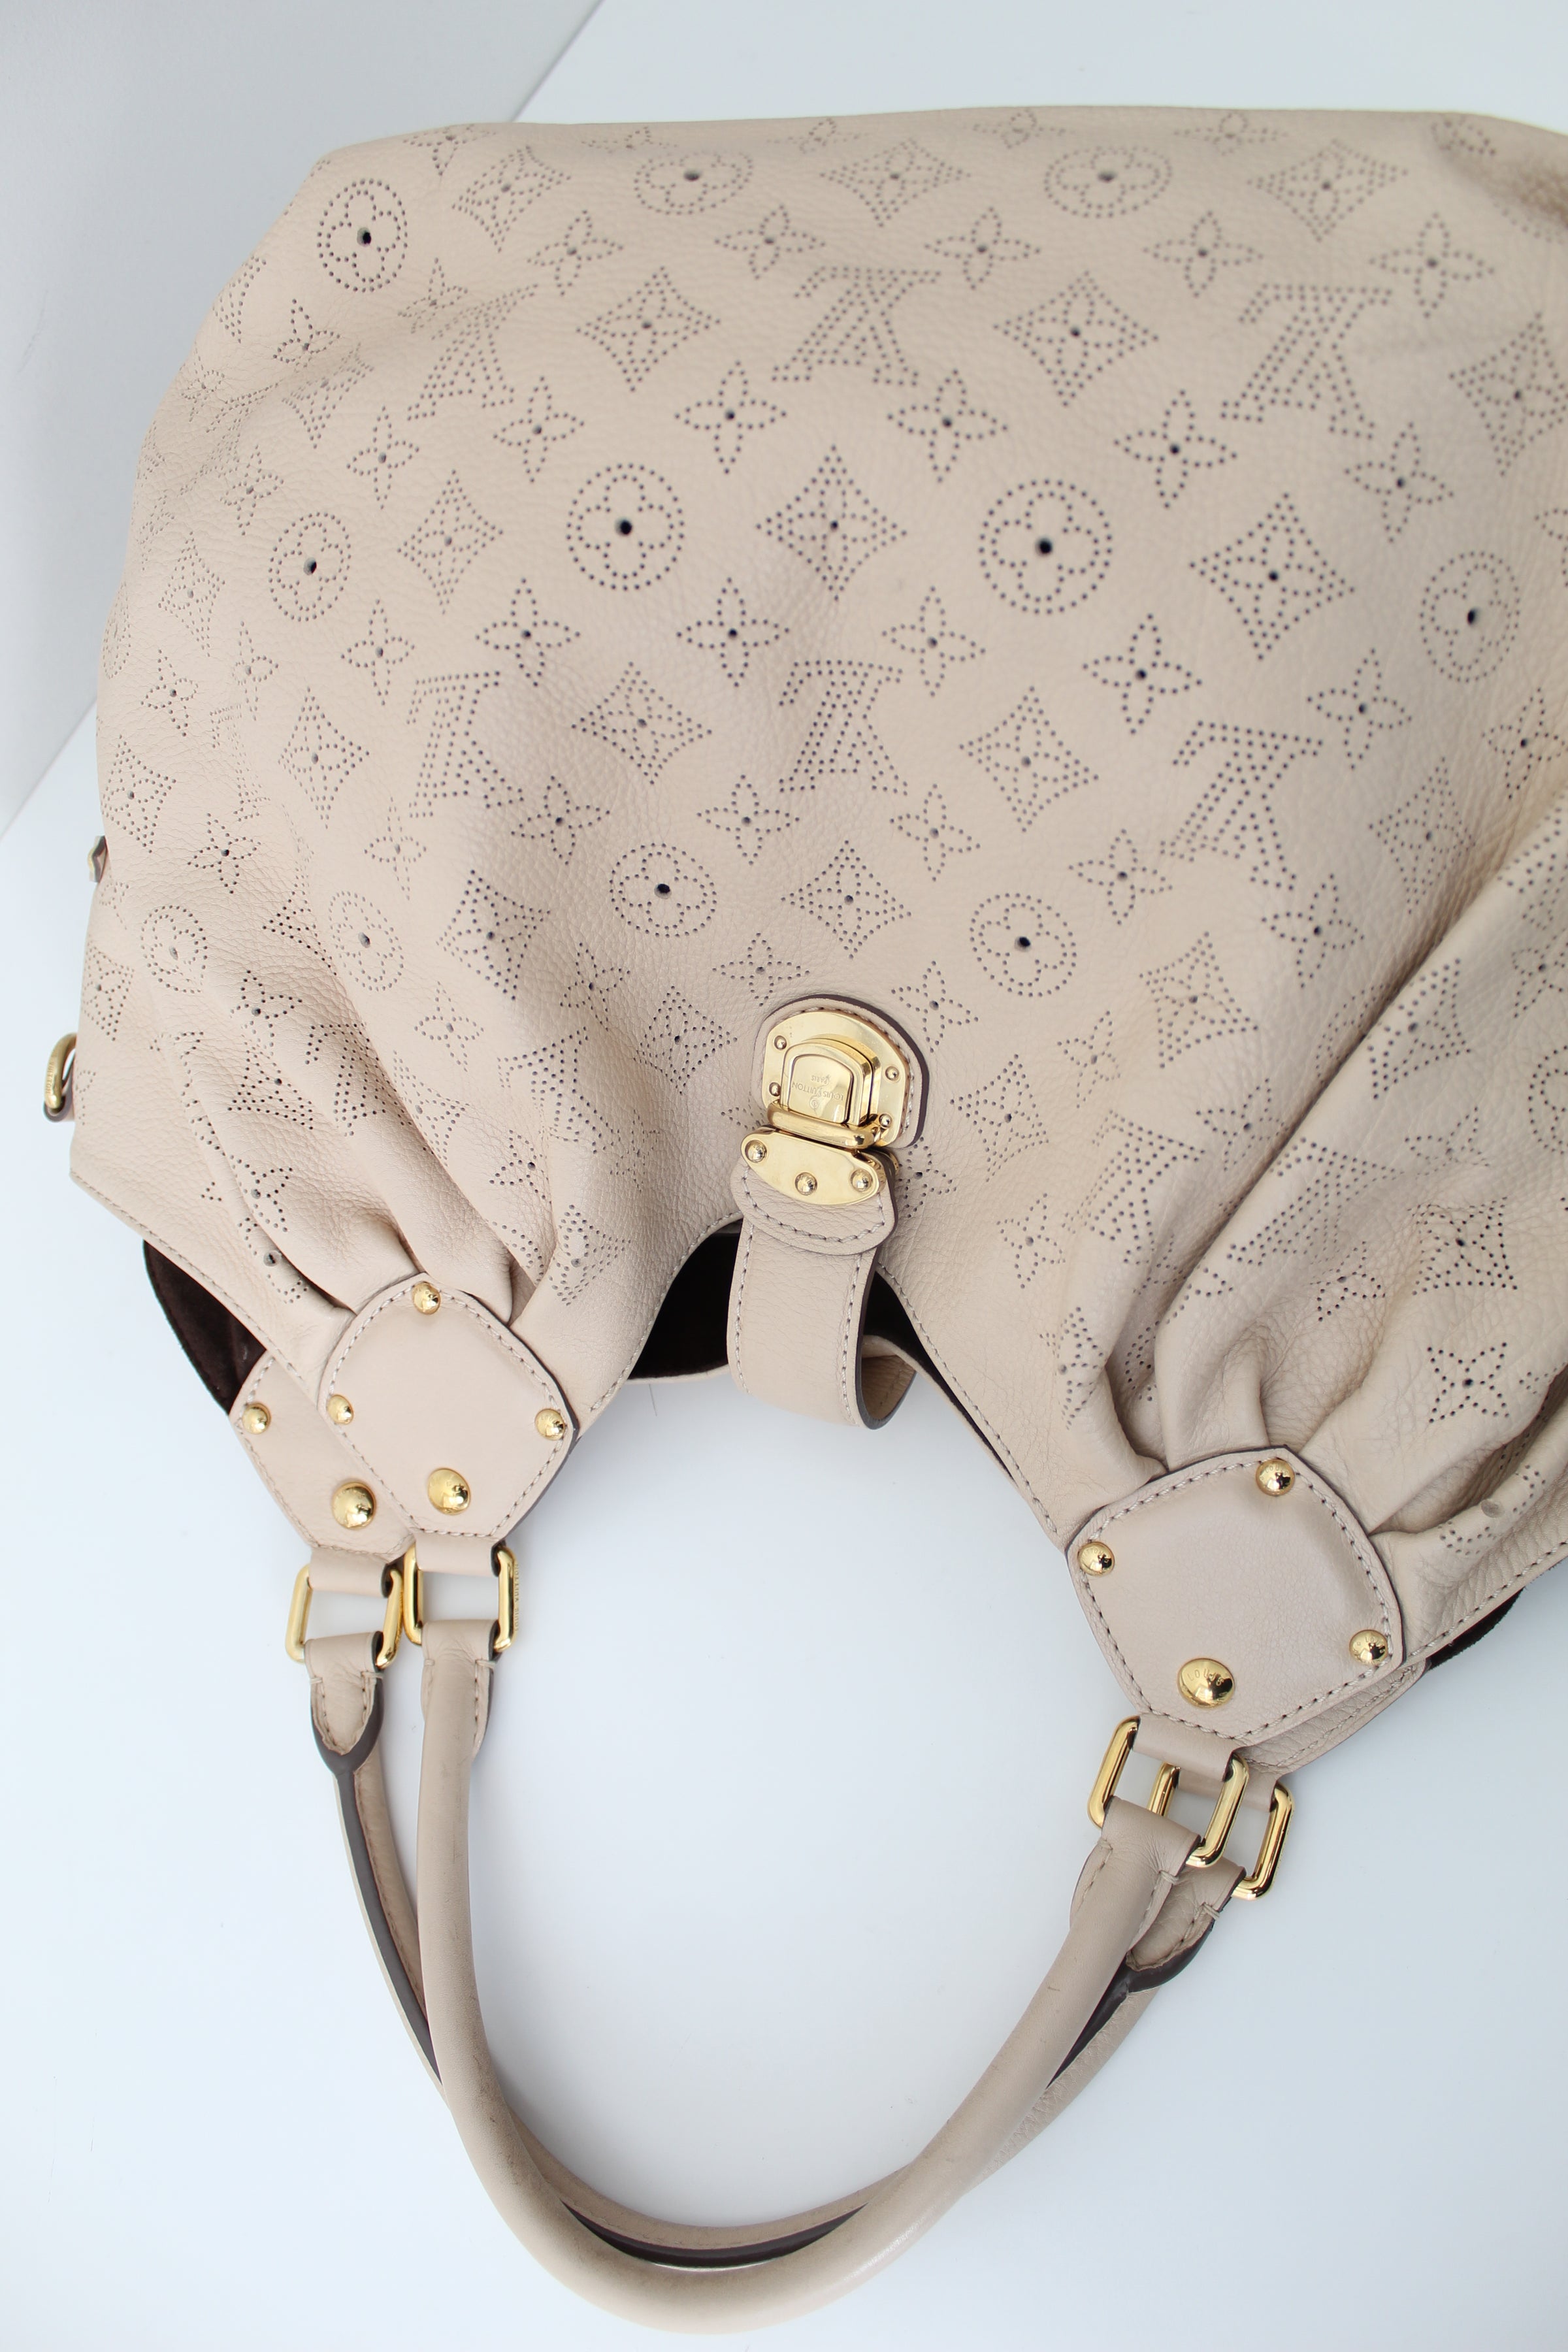 Sold at Auction: LOUIS VUITTON MAHINA HOBO TAUPE BAG